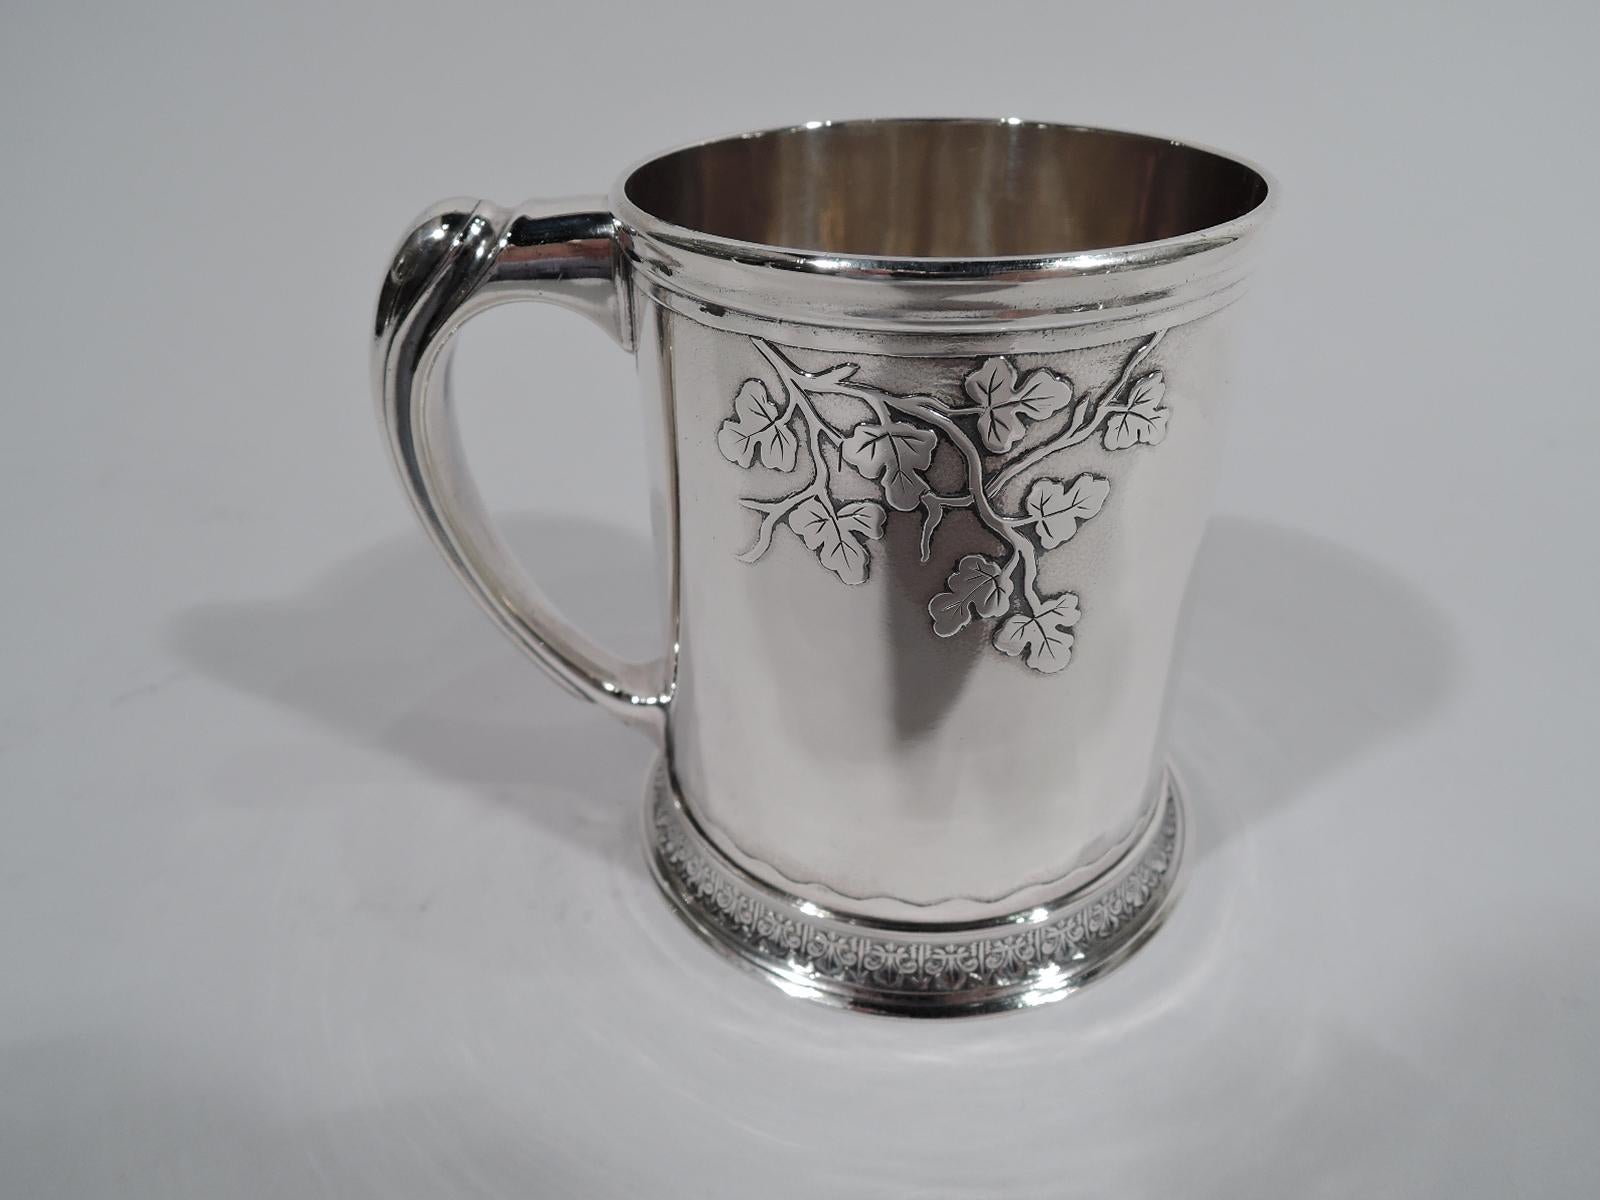 American Antique Whiting Edwardian Art Nouveau Sterling Silver Baby Cup